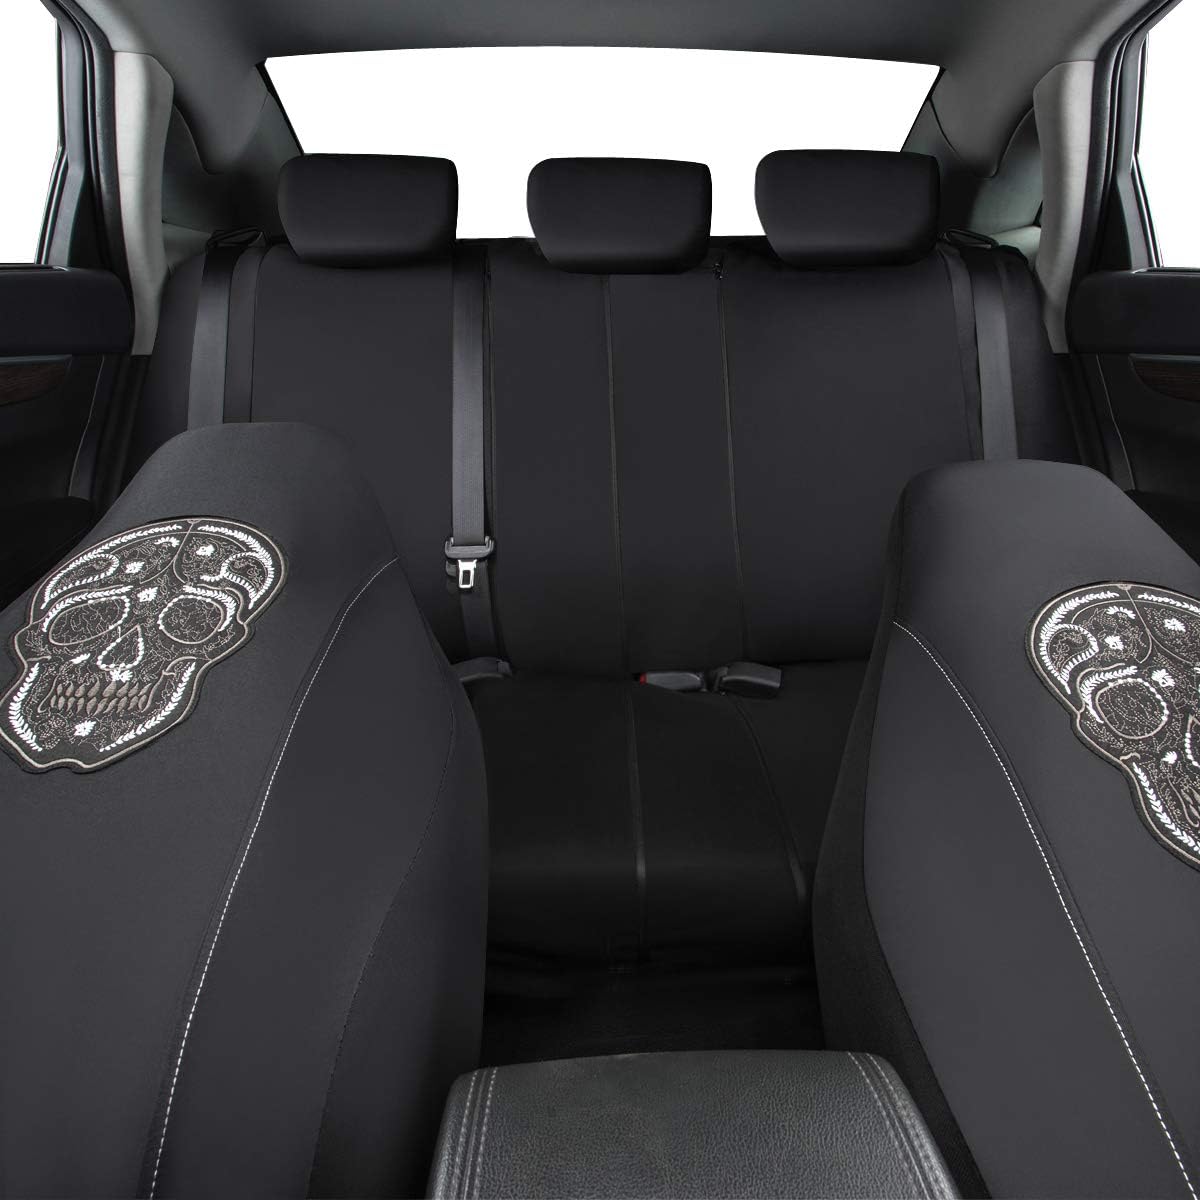 CAR PASS Skull Design Universal Fit Two Front Seat Covers, Gaberdine Fabric Cloth Front Seats Only Skeleton Punkl, Universal Fit for SUVs,Vans,Coupe,Trucks (2 Piece Black White)